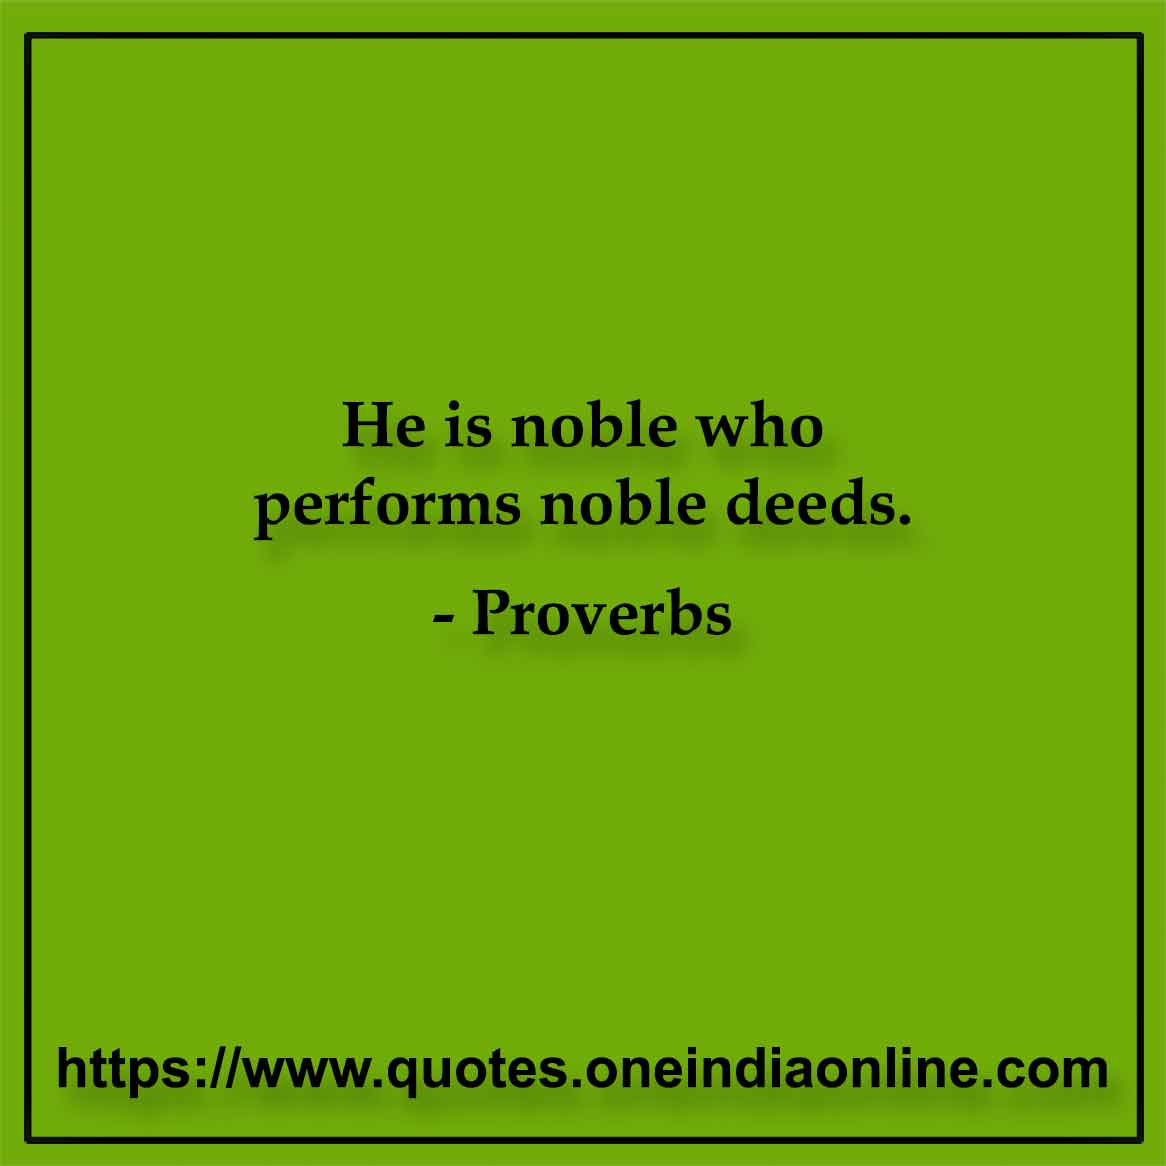 He is noble who performs noble deeds.

Dutch Proverbs